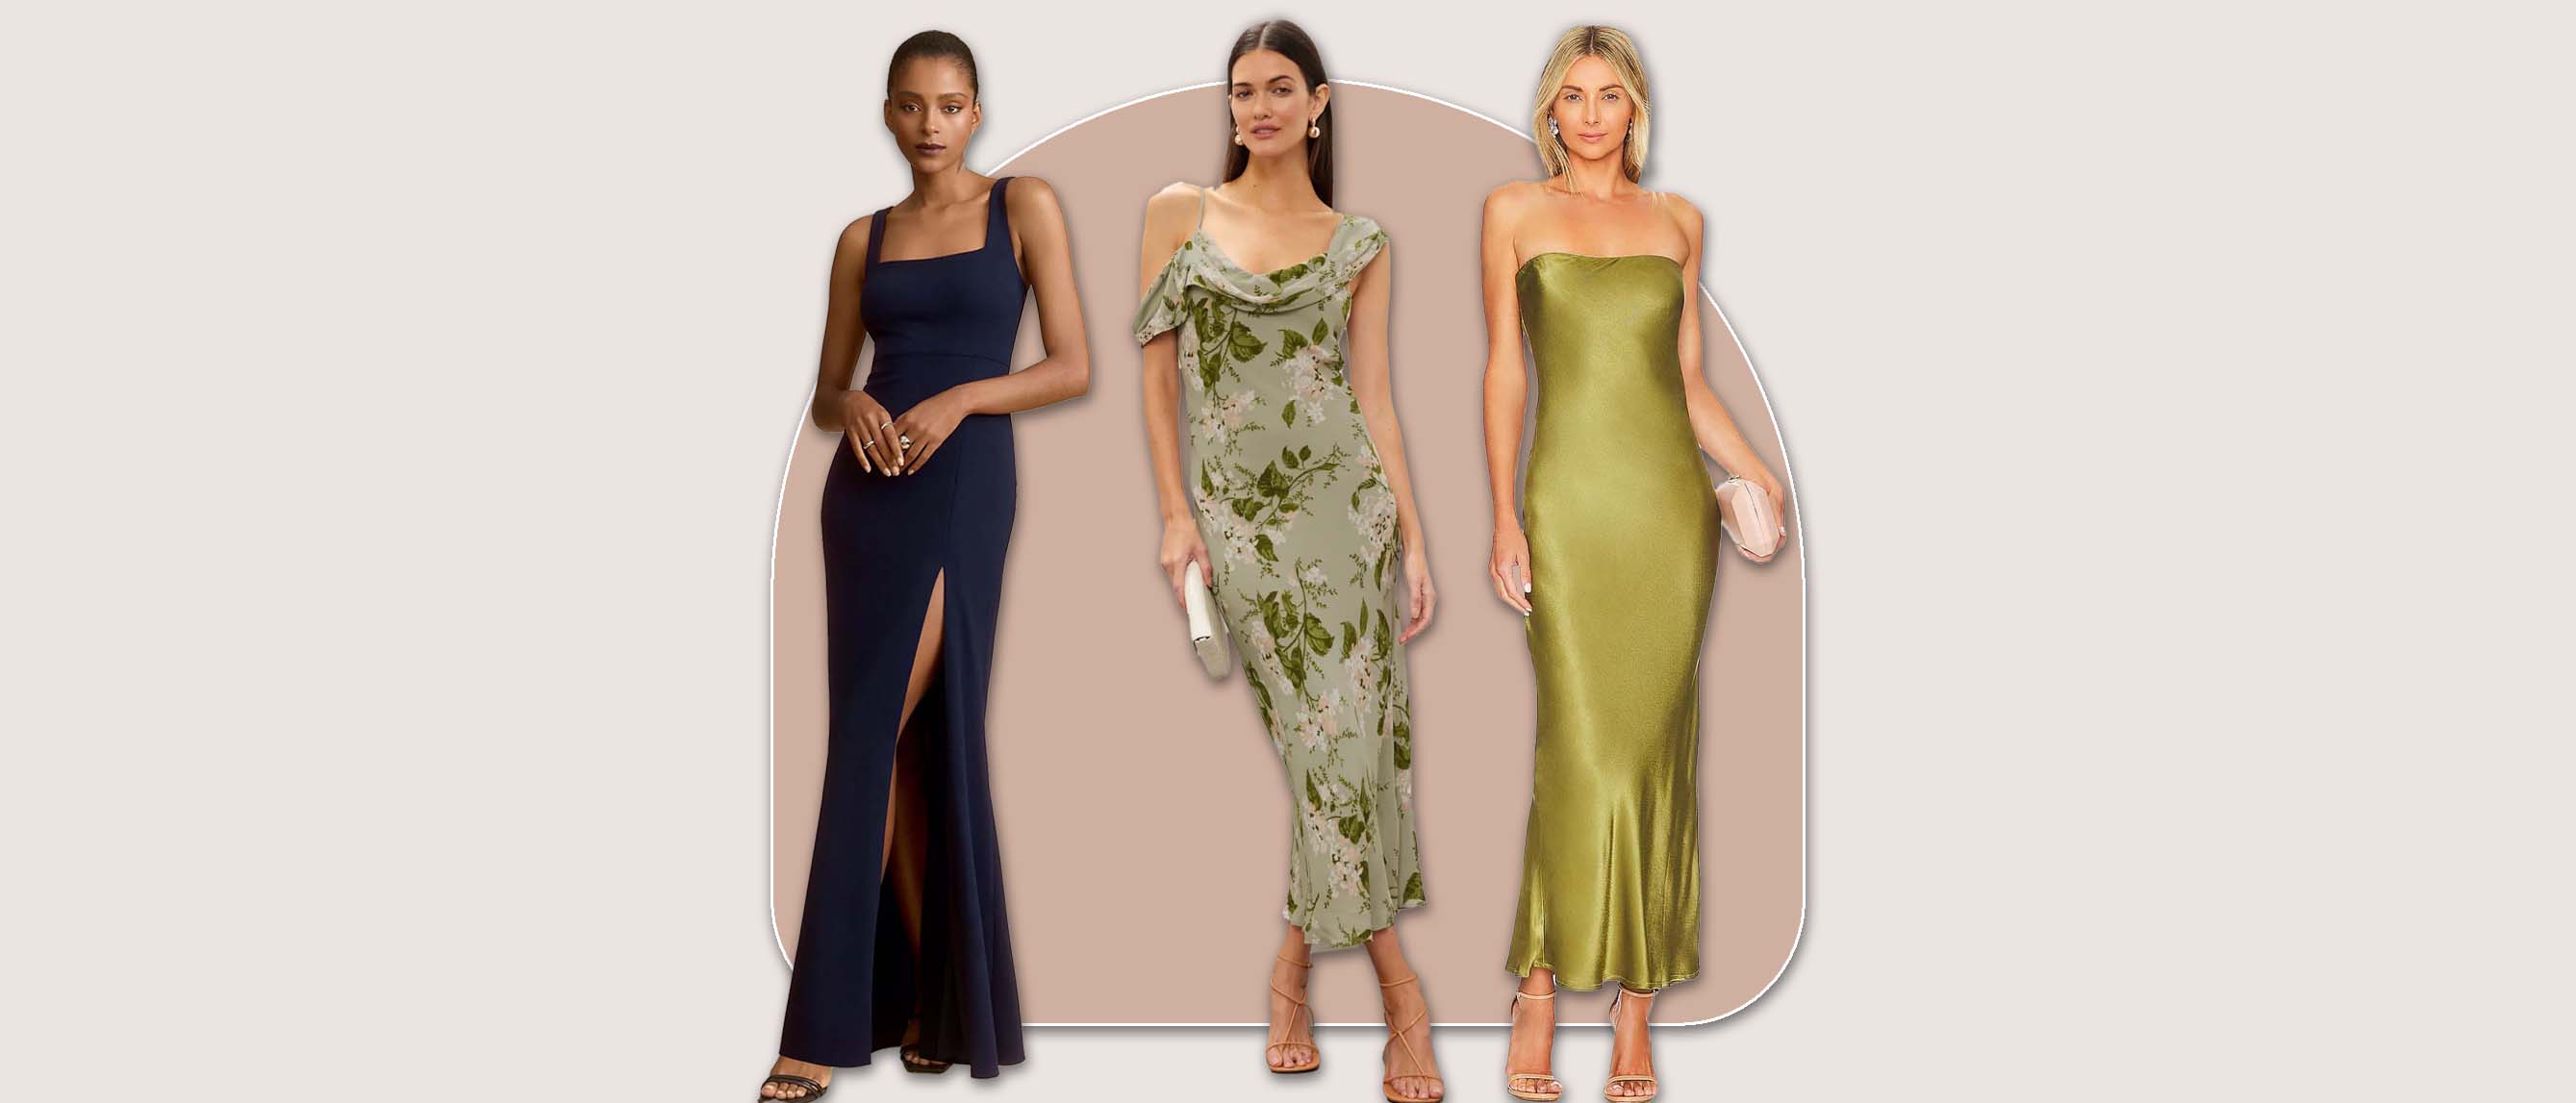 three of the best wedding guest dresses including an olive strapless stress, a blue gown and green floral dress